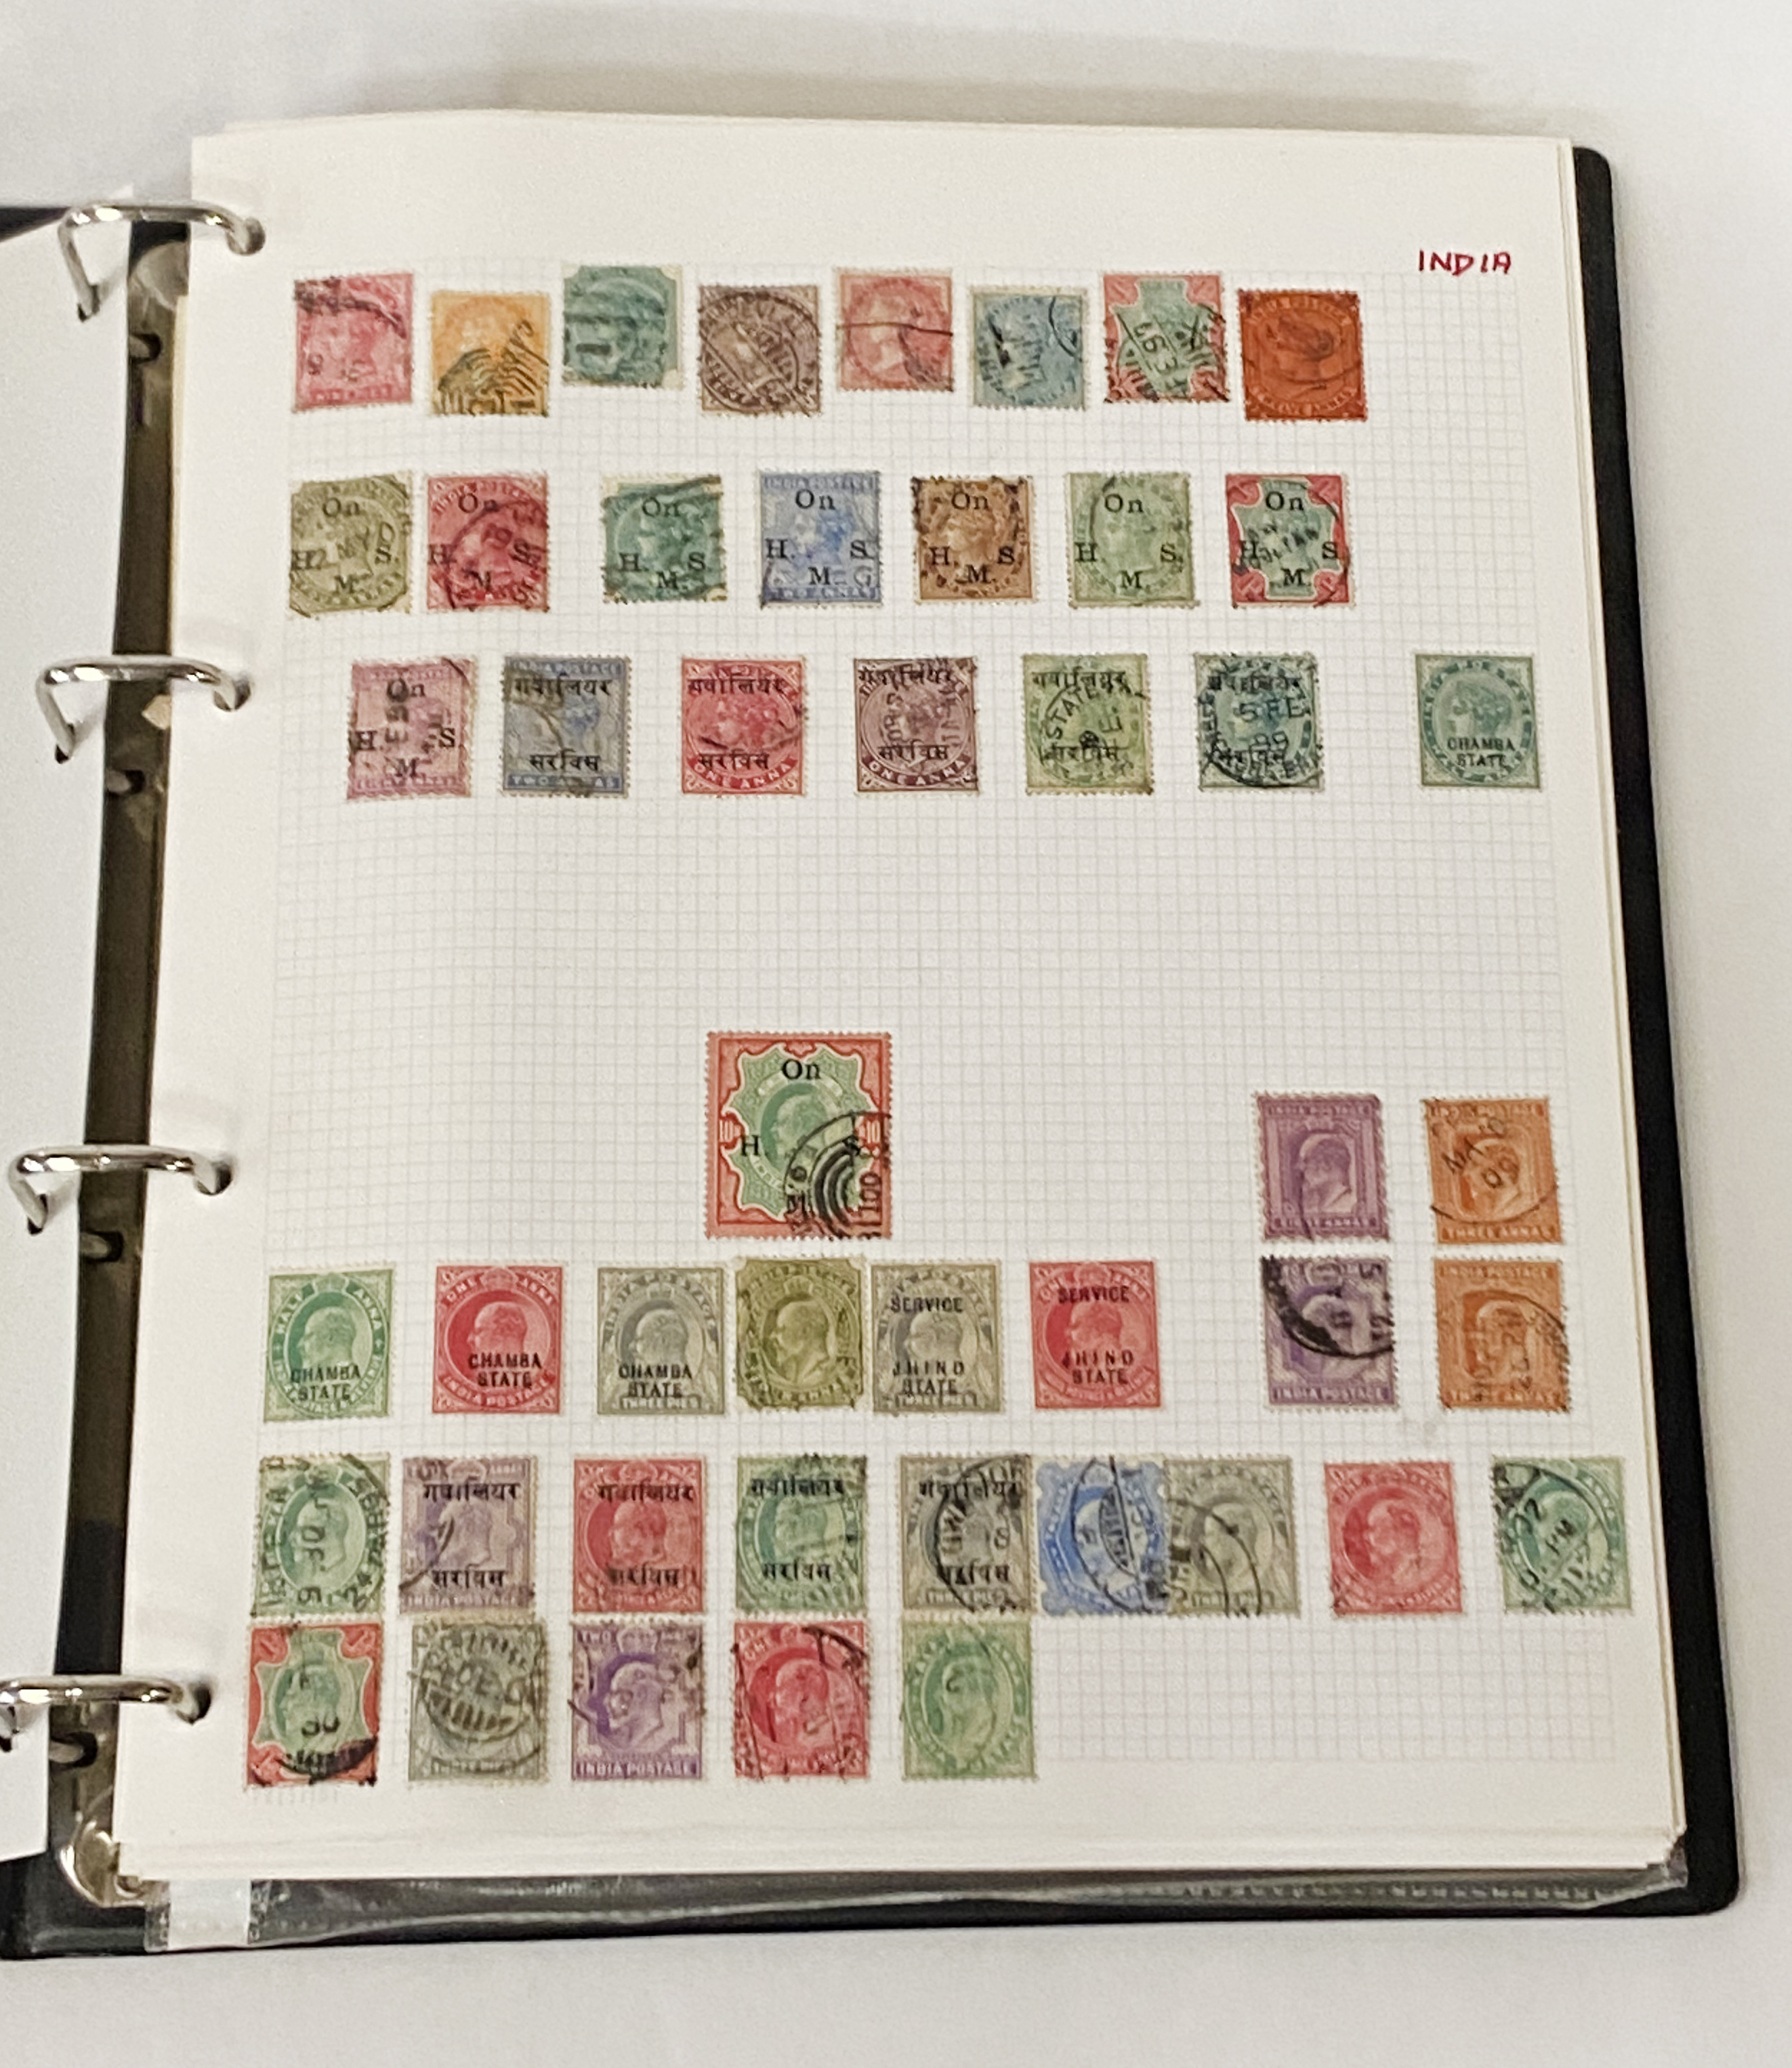 INDIAN & STATES PORTUGAL & COLONIES ETC STAMP ALBUM - SOME HIGH VALUES WORTH CHECKING